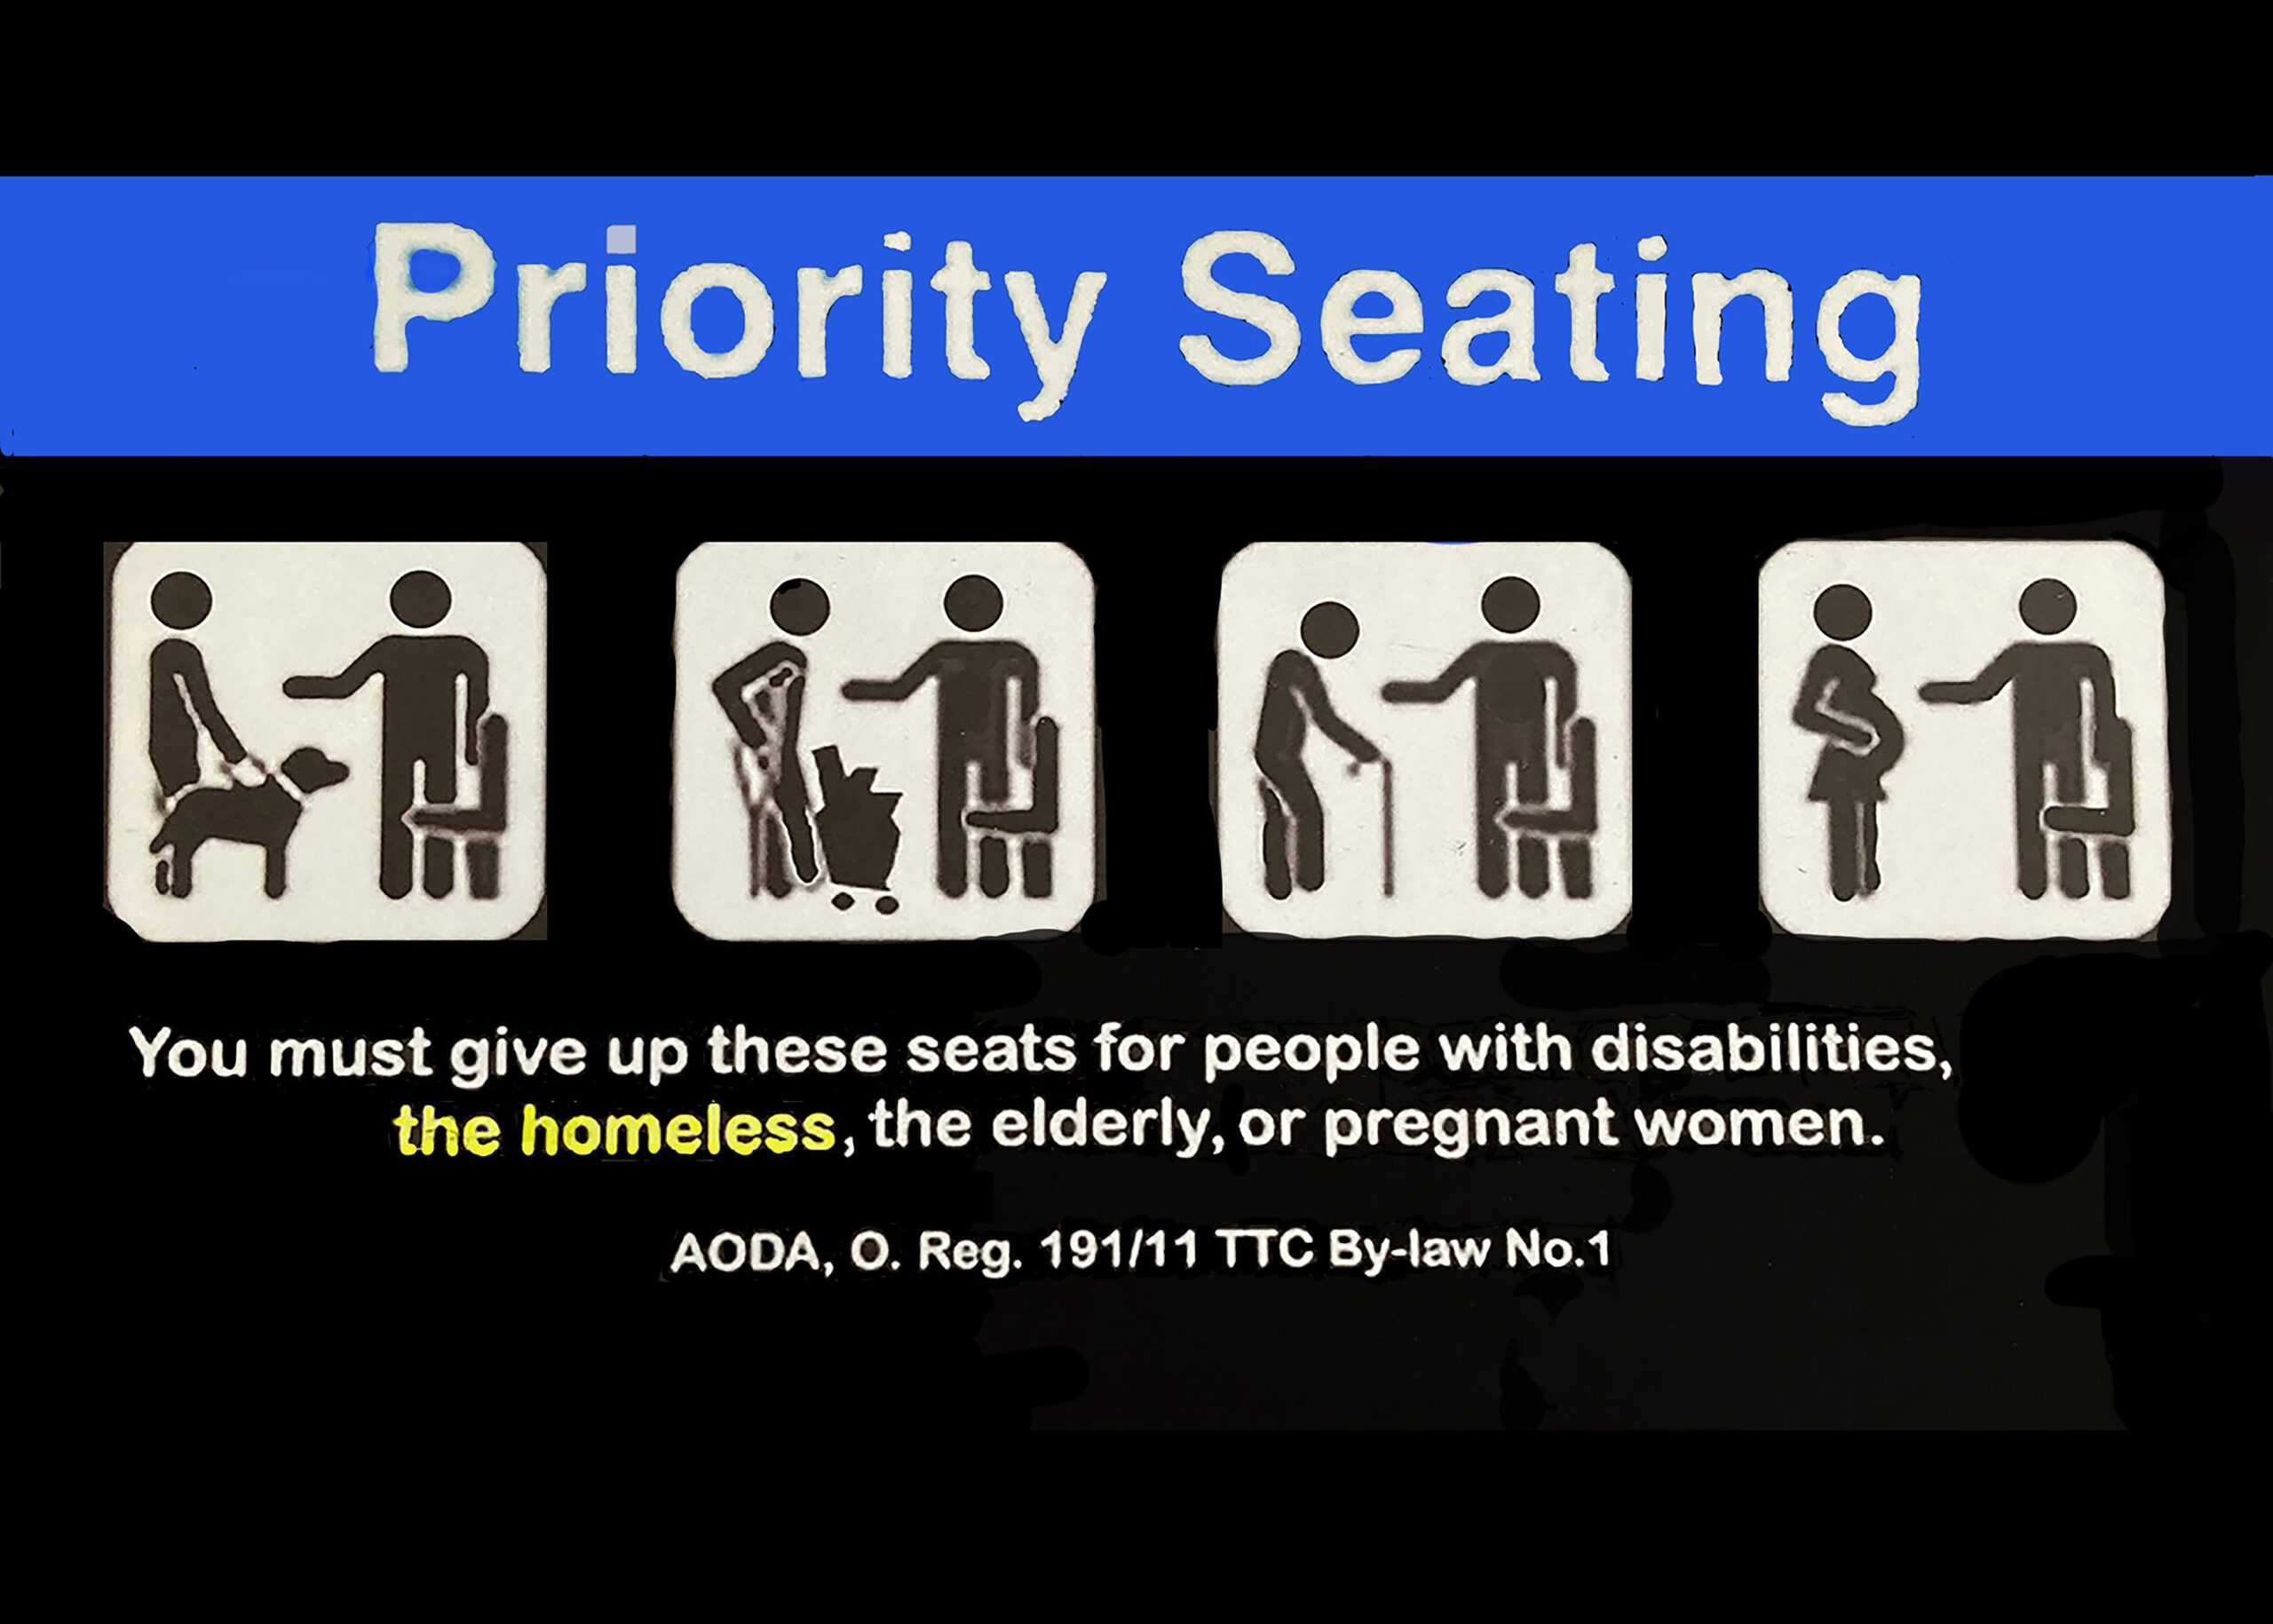 PC Priority Seating Card 600 dpi 8-19-21